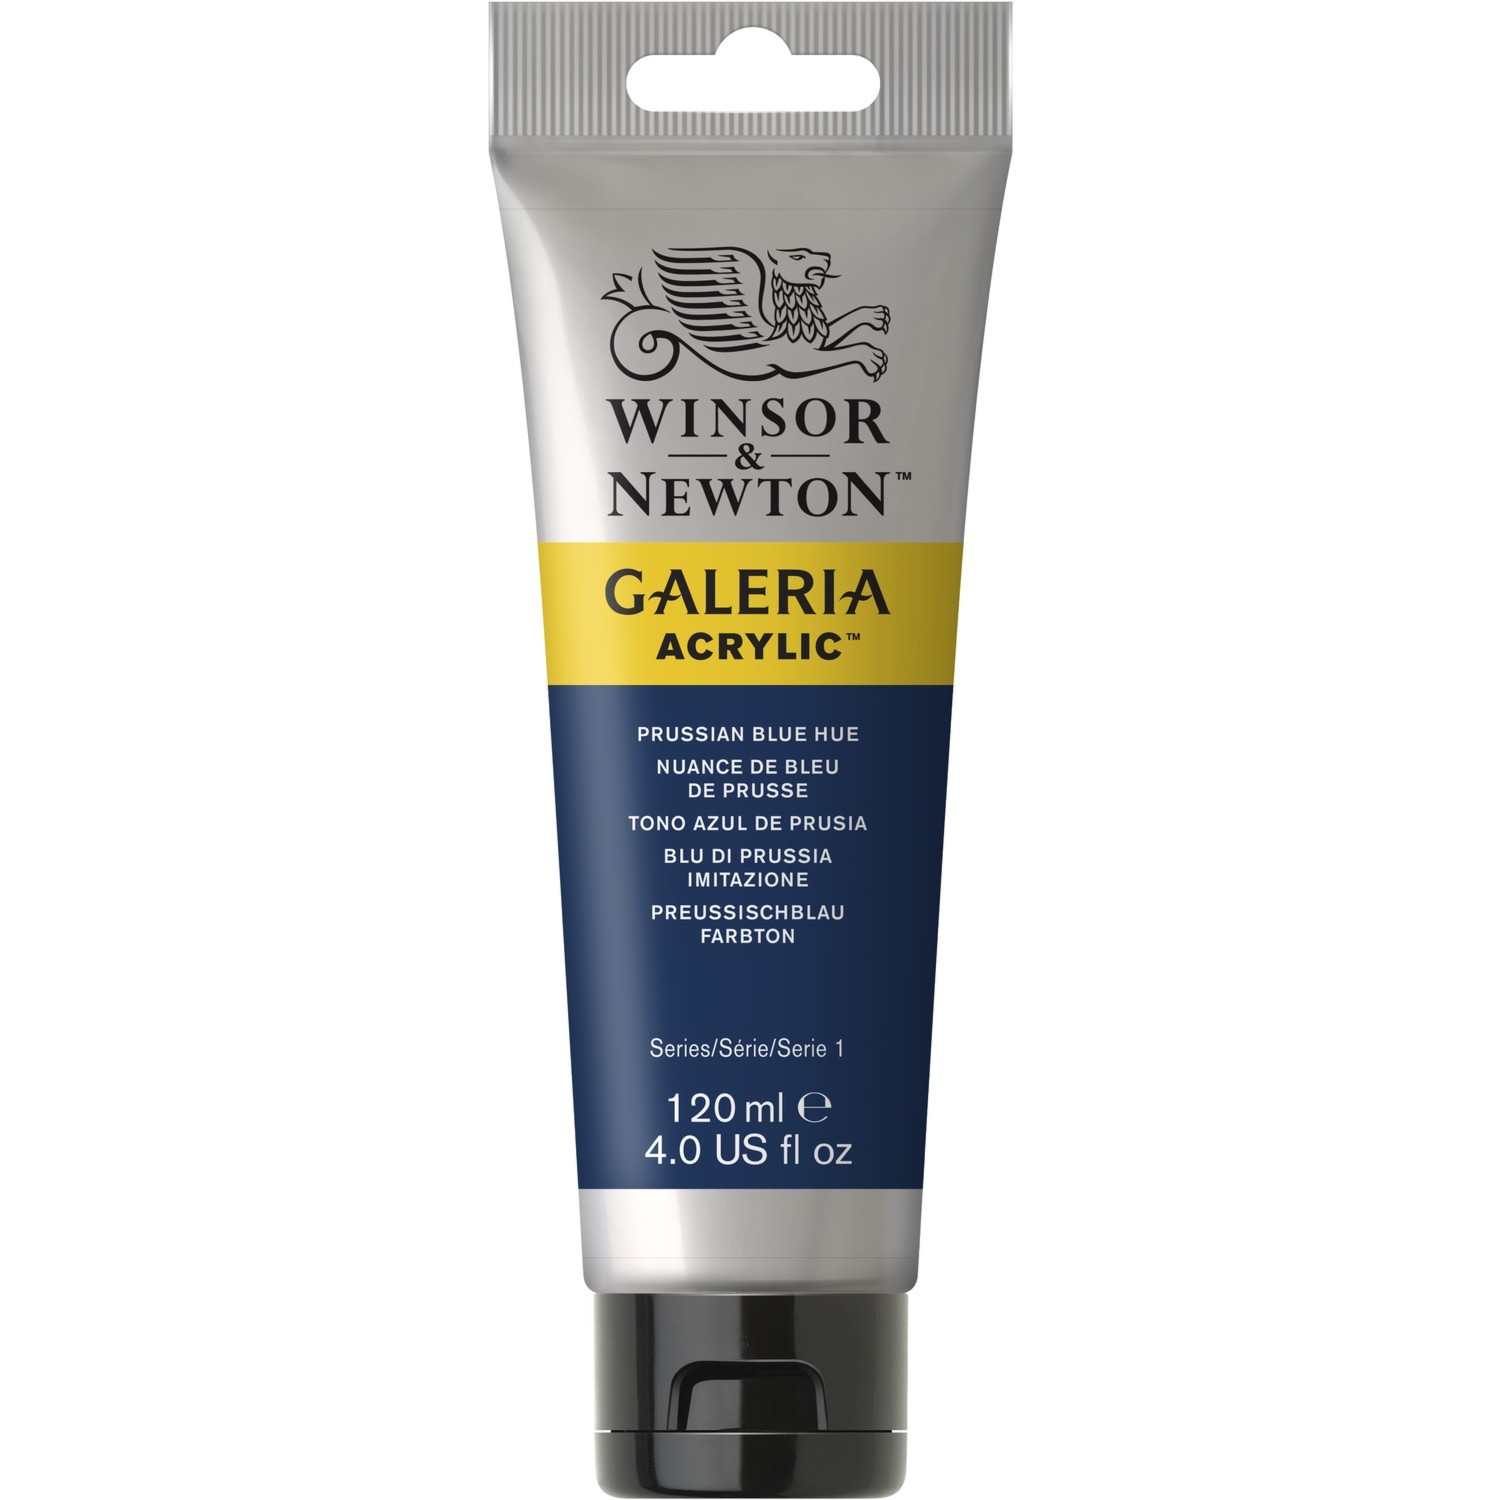 Winsor and Newton 120ml Galeria Acrylic Colour Paint - Prussian Blue Hue Image